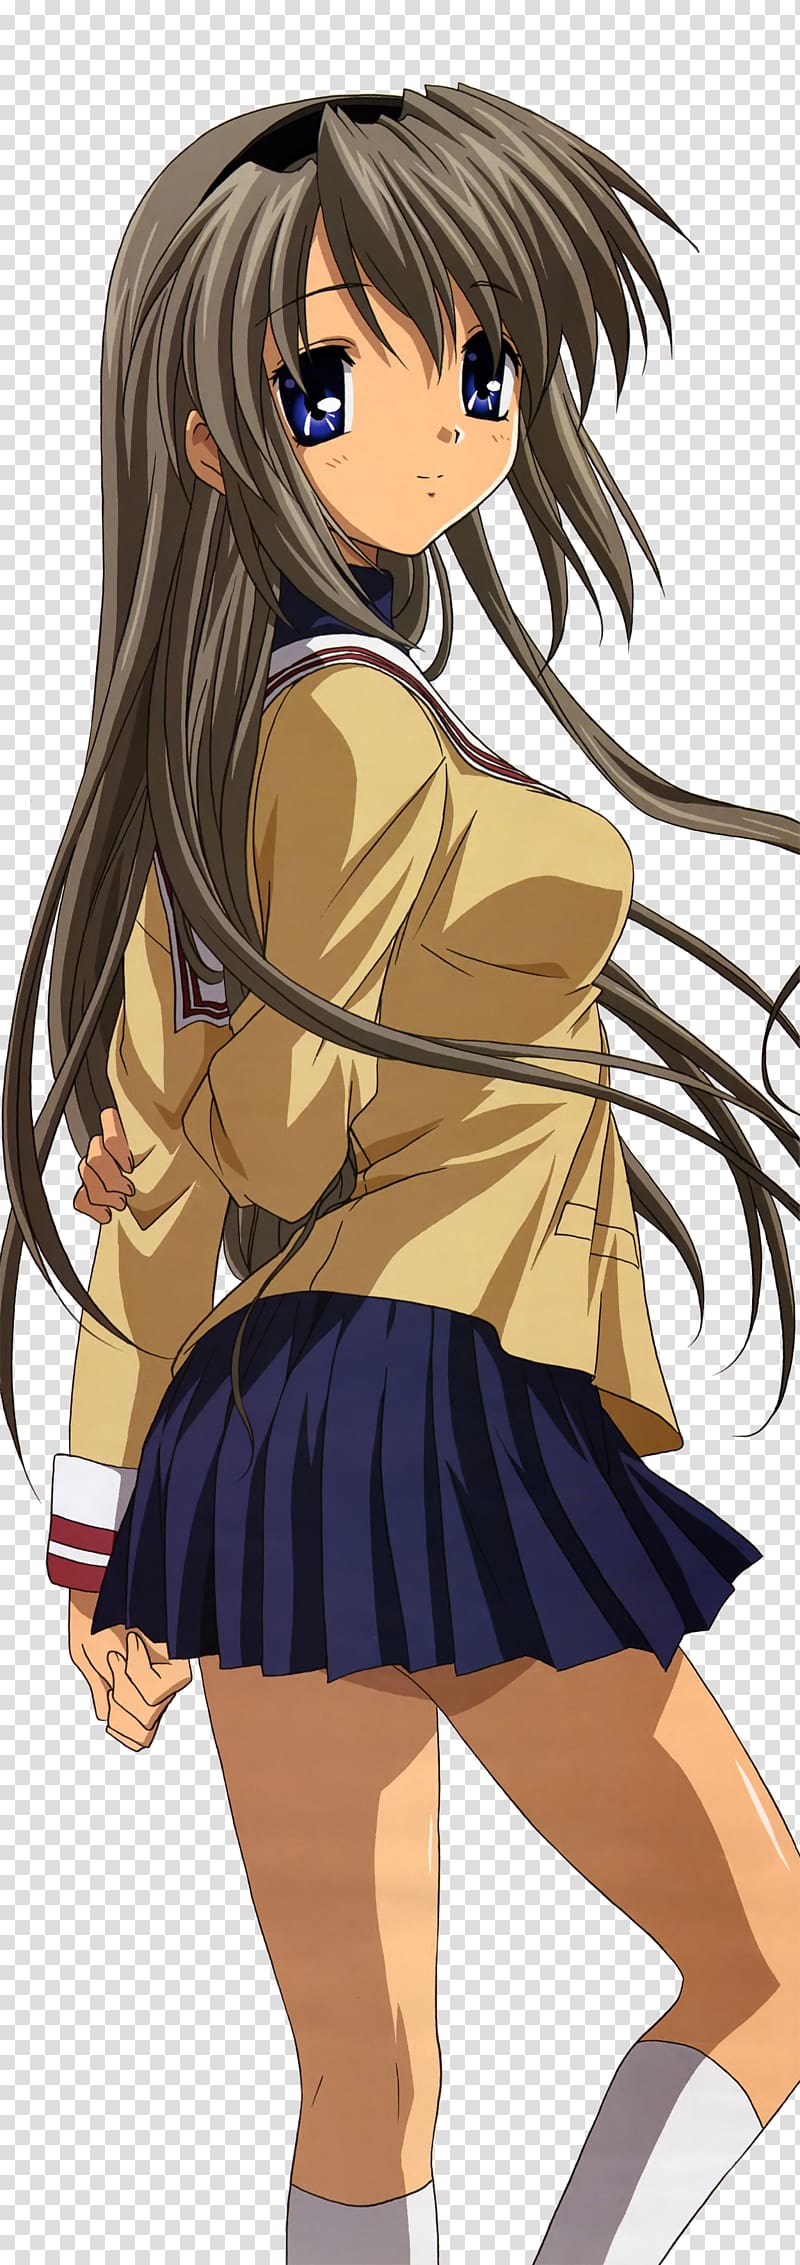 Clannad Tomoyo After: It's a Wonderful Life Tomoya Okazaki Kyoto Animation, others transparent background PNG clipart